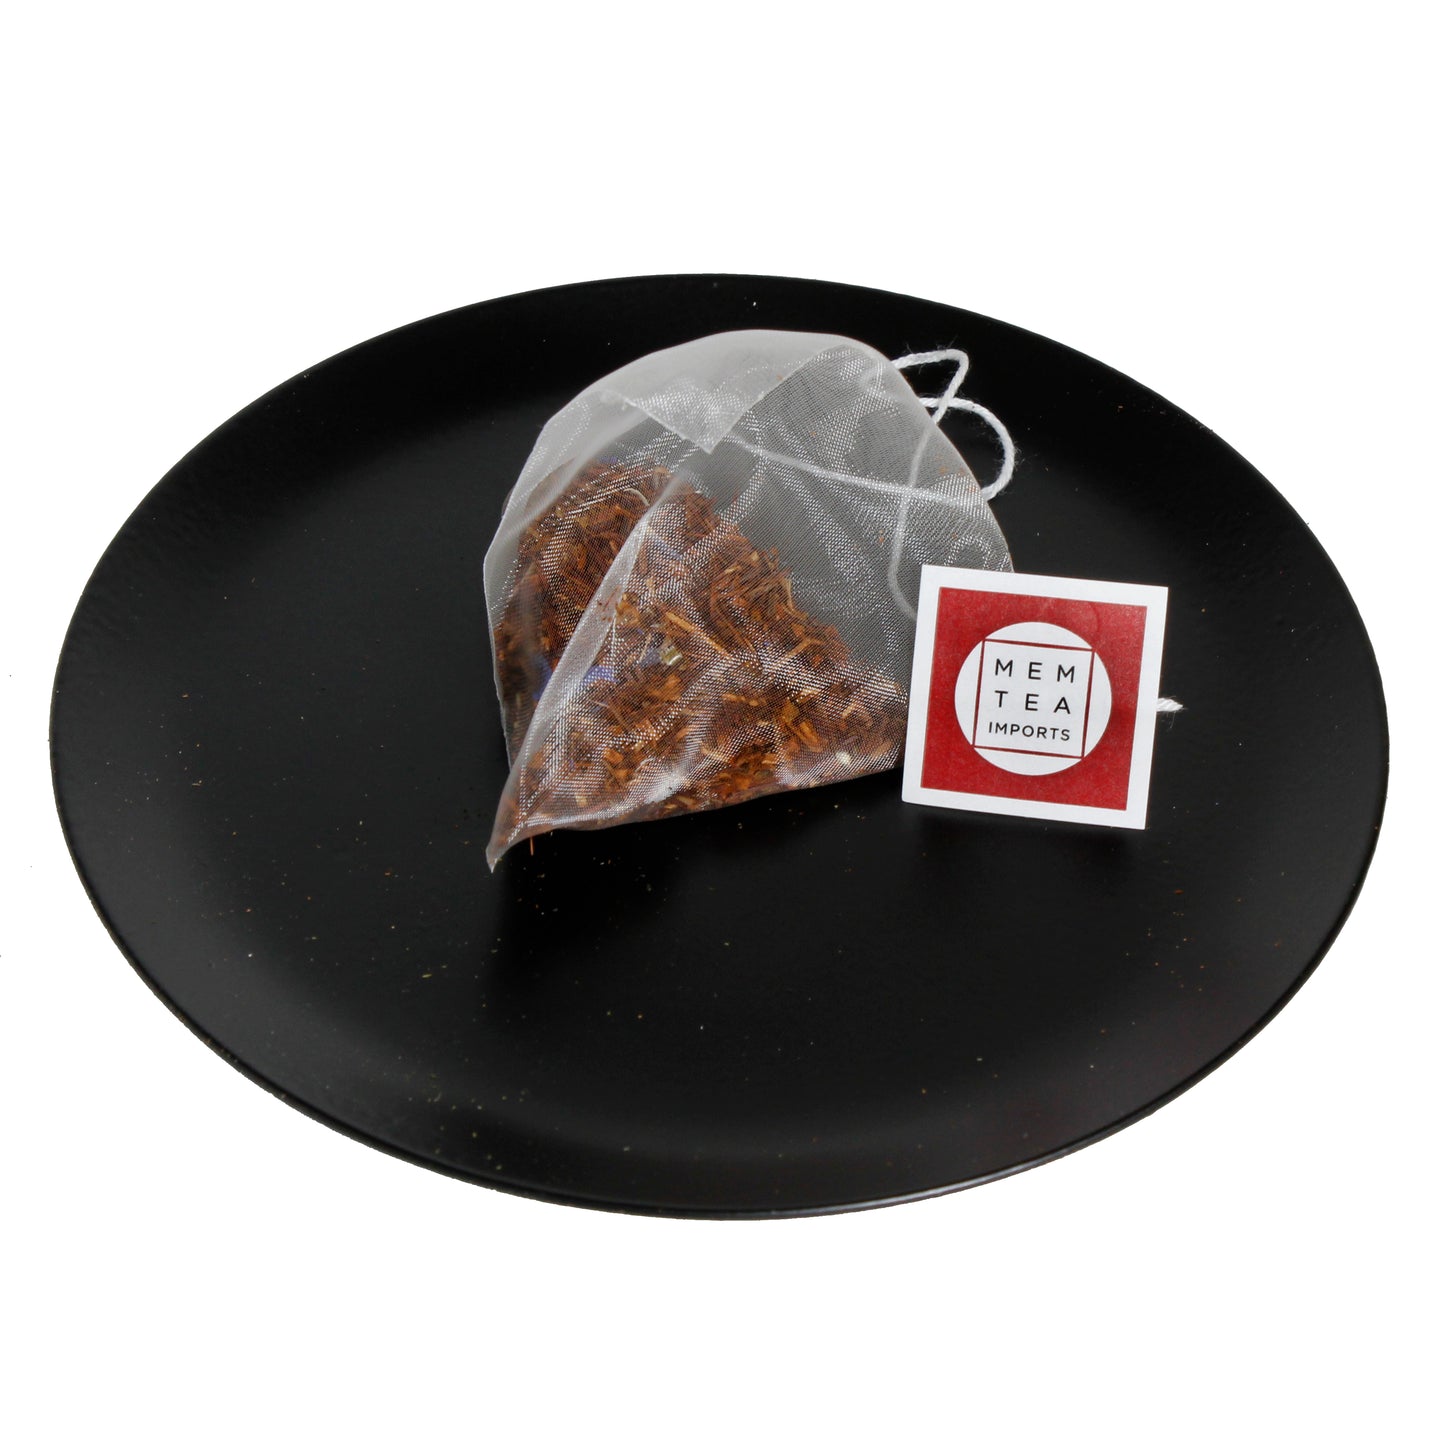 Rooibos Decorated - Pyramid Teabags